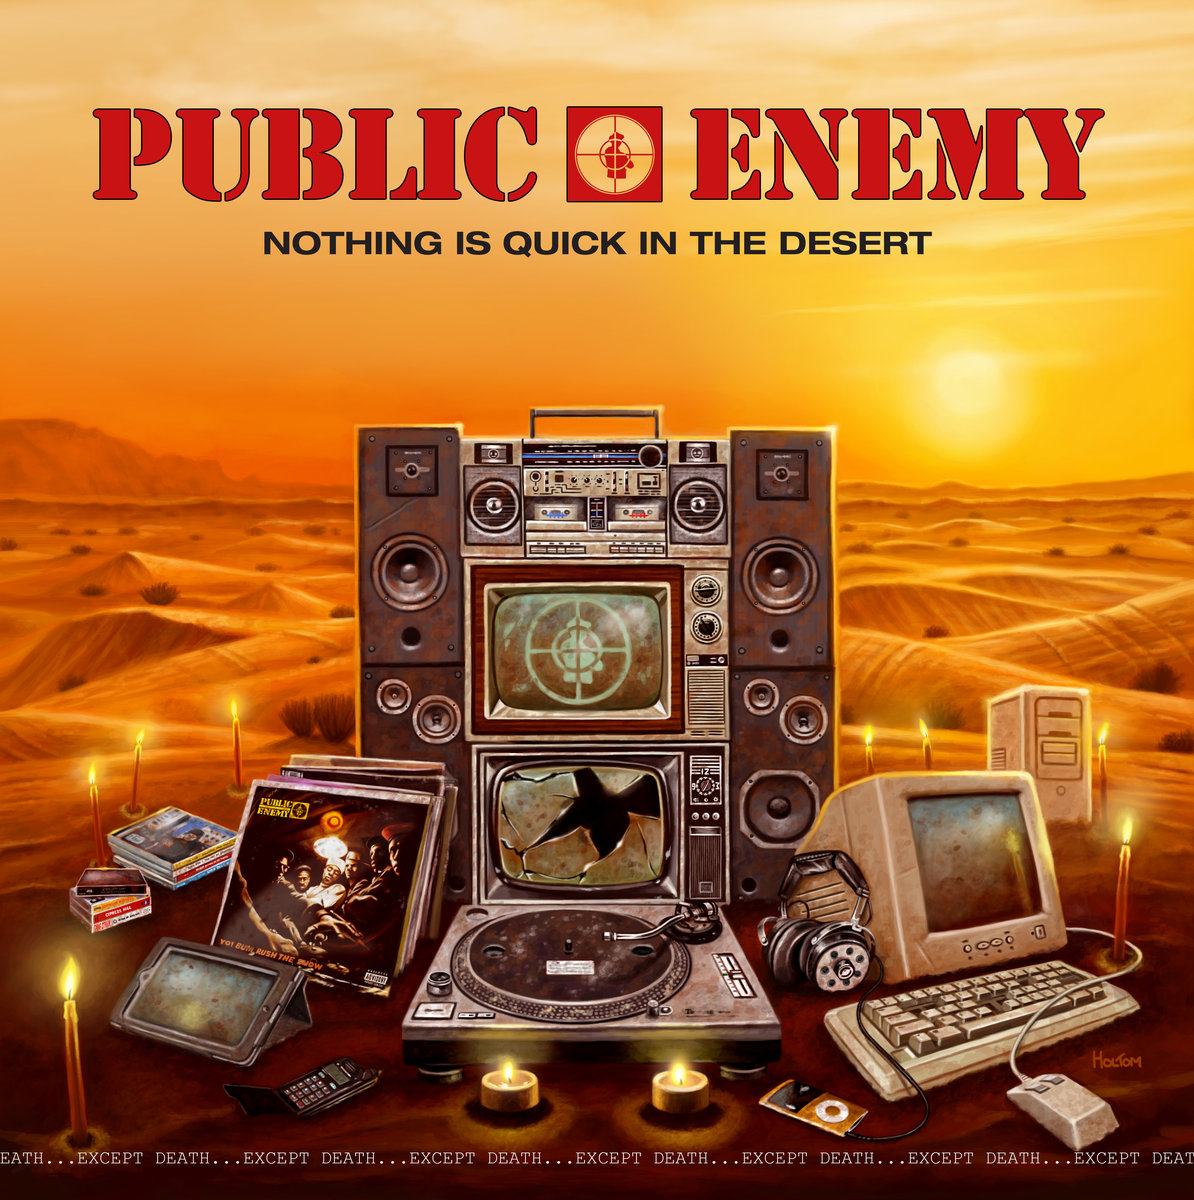 publicenemy nothingisquick - Radio Clash Podcast Public Enemy free album to celebrate their 30th anniversary Radio Clash Music Mashup Podcast brings you the best in eclectic tunes, mashups and remixes from around the world. Since 2004, we've been bringing you the freshest and most innovative music from a diverse range of genres and cultures. Join us on our musical journey as we explore the sounds of yesterday, today, and tomorrow. Discover new music and be inspired by the mashup of musical styles that only Radio Clash can provide. Subscribe now to elevate your musical experience!